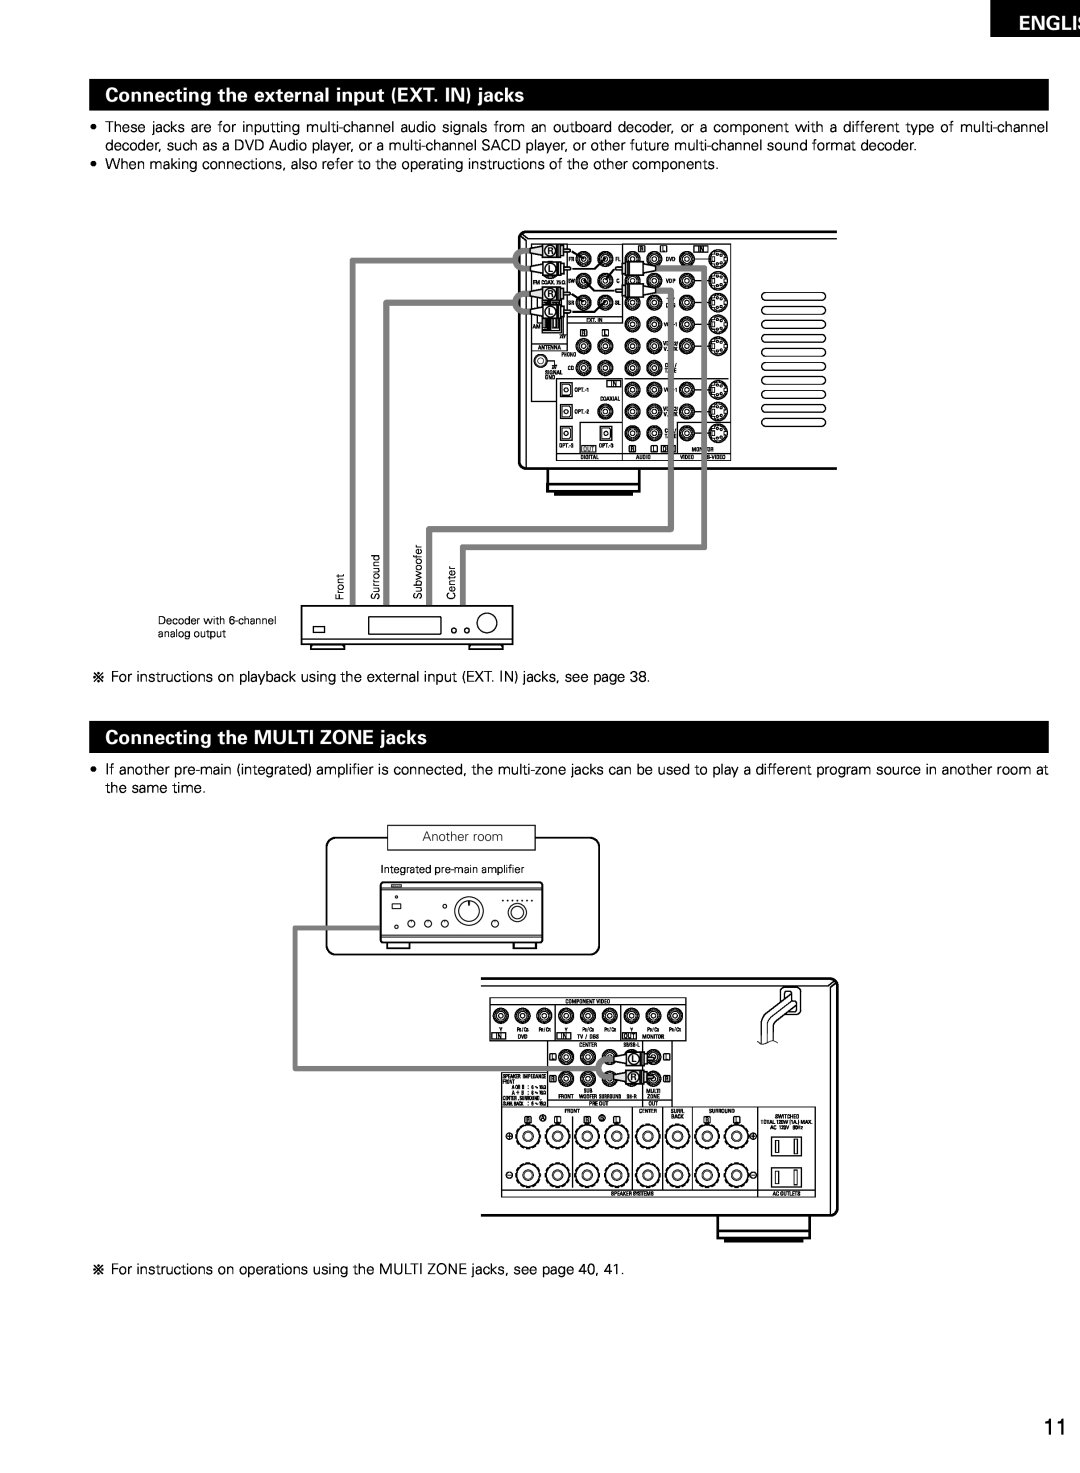 Denon AVR-2802/982 Englis, Connecting the external input EXT. IN jacks, Connecting the MULTI ZONE jacks, Another room 